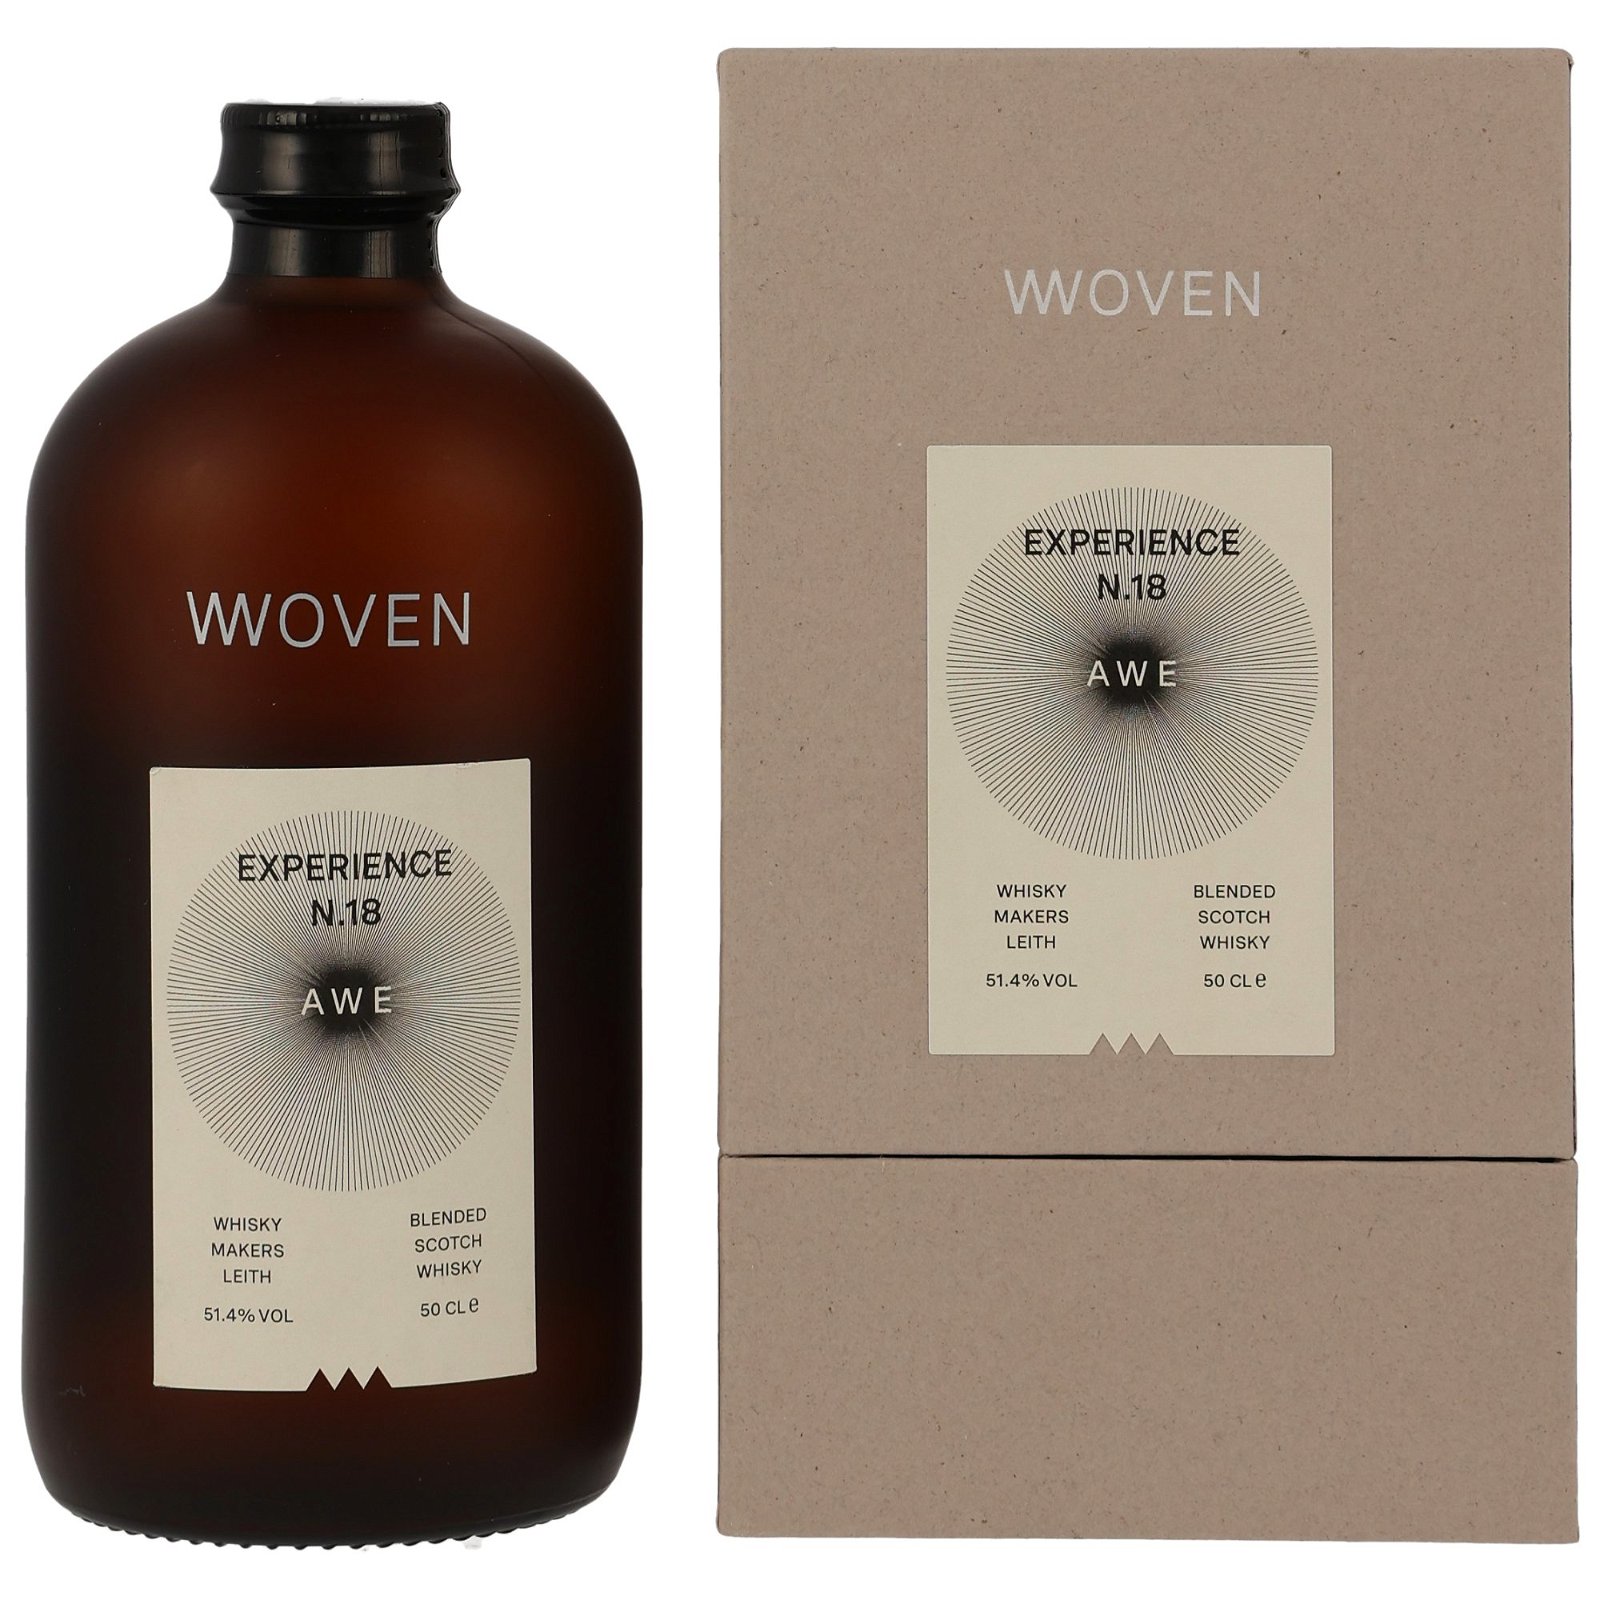 Woven Experience No. 18 Awe